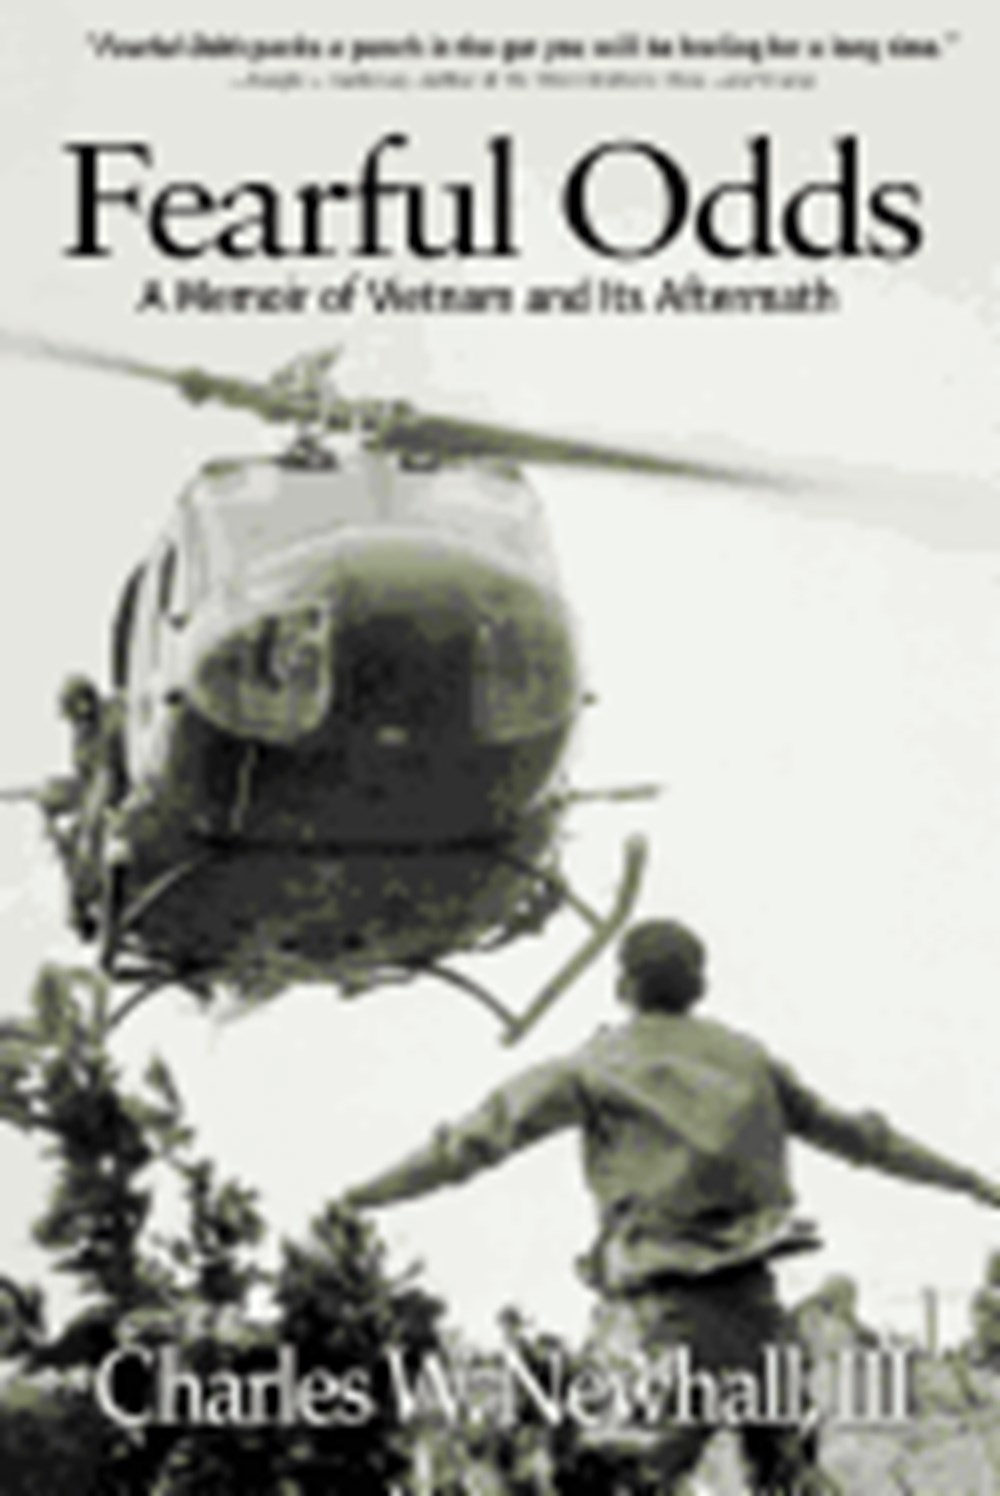 Fearful Odds: A Memoir of Vietnam and Its Aftermath